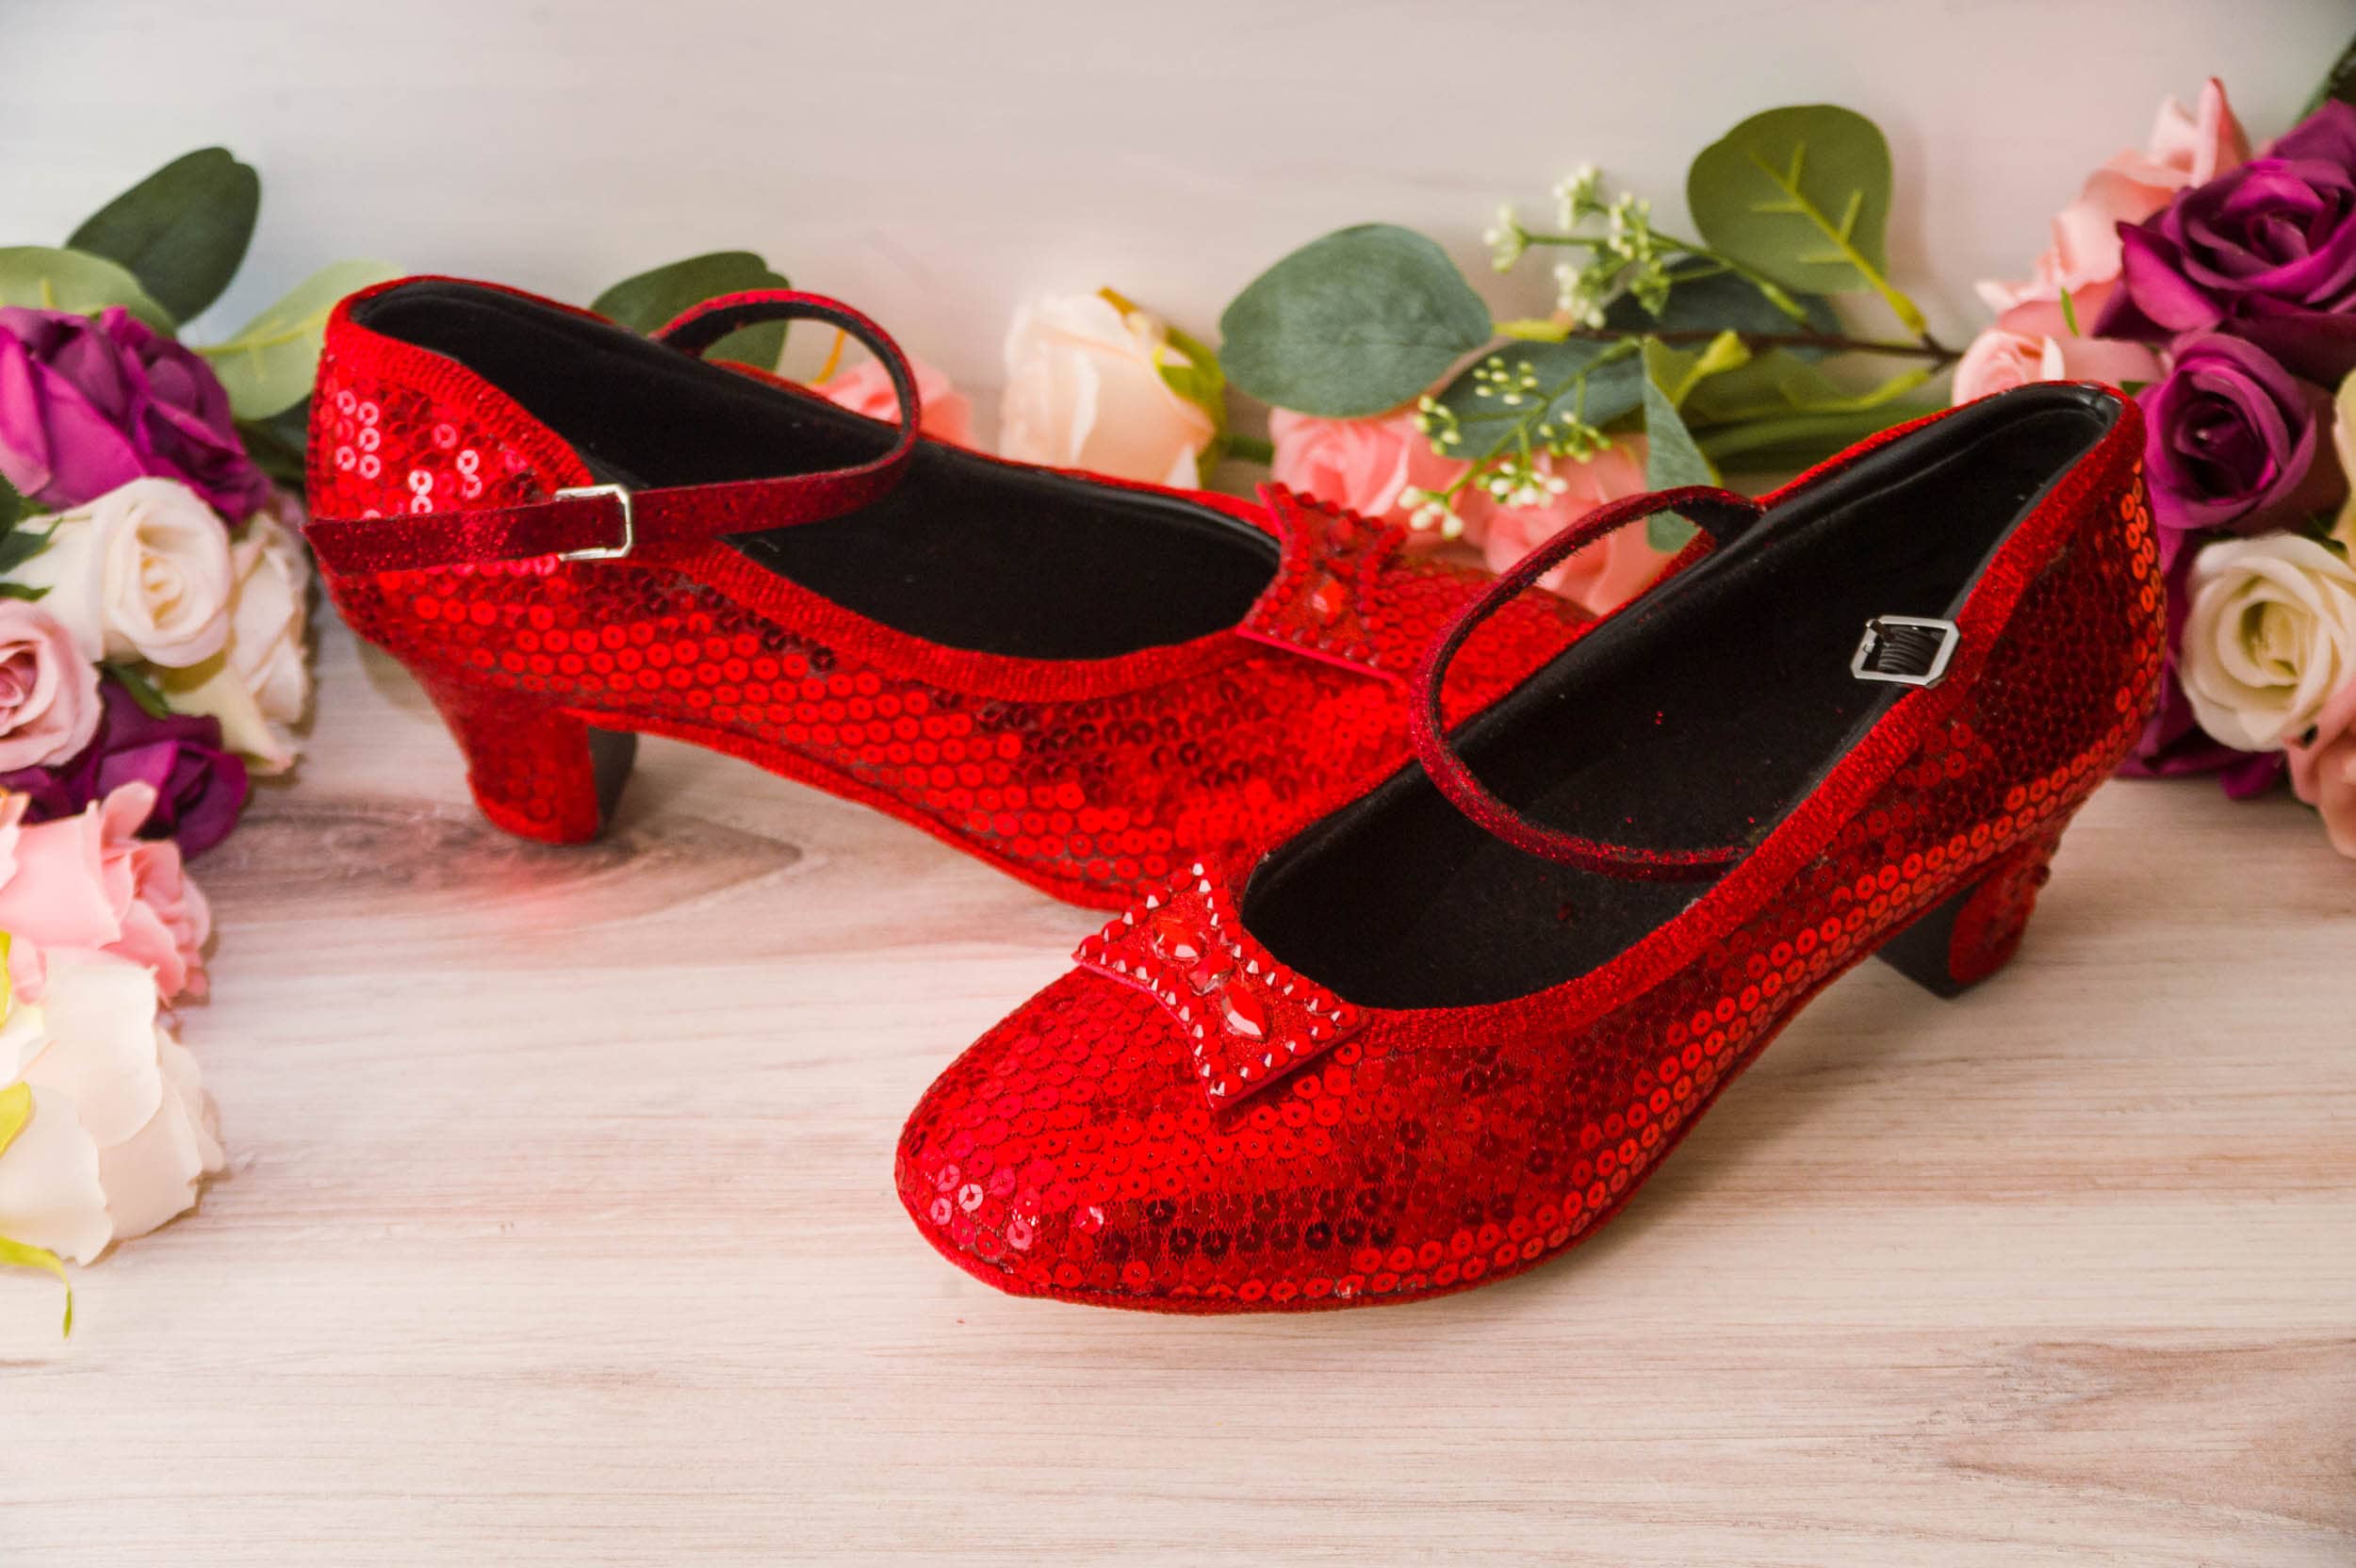 Red Shoes Dance Shoes for Women Dance Shoes Low Heel - Etsy